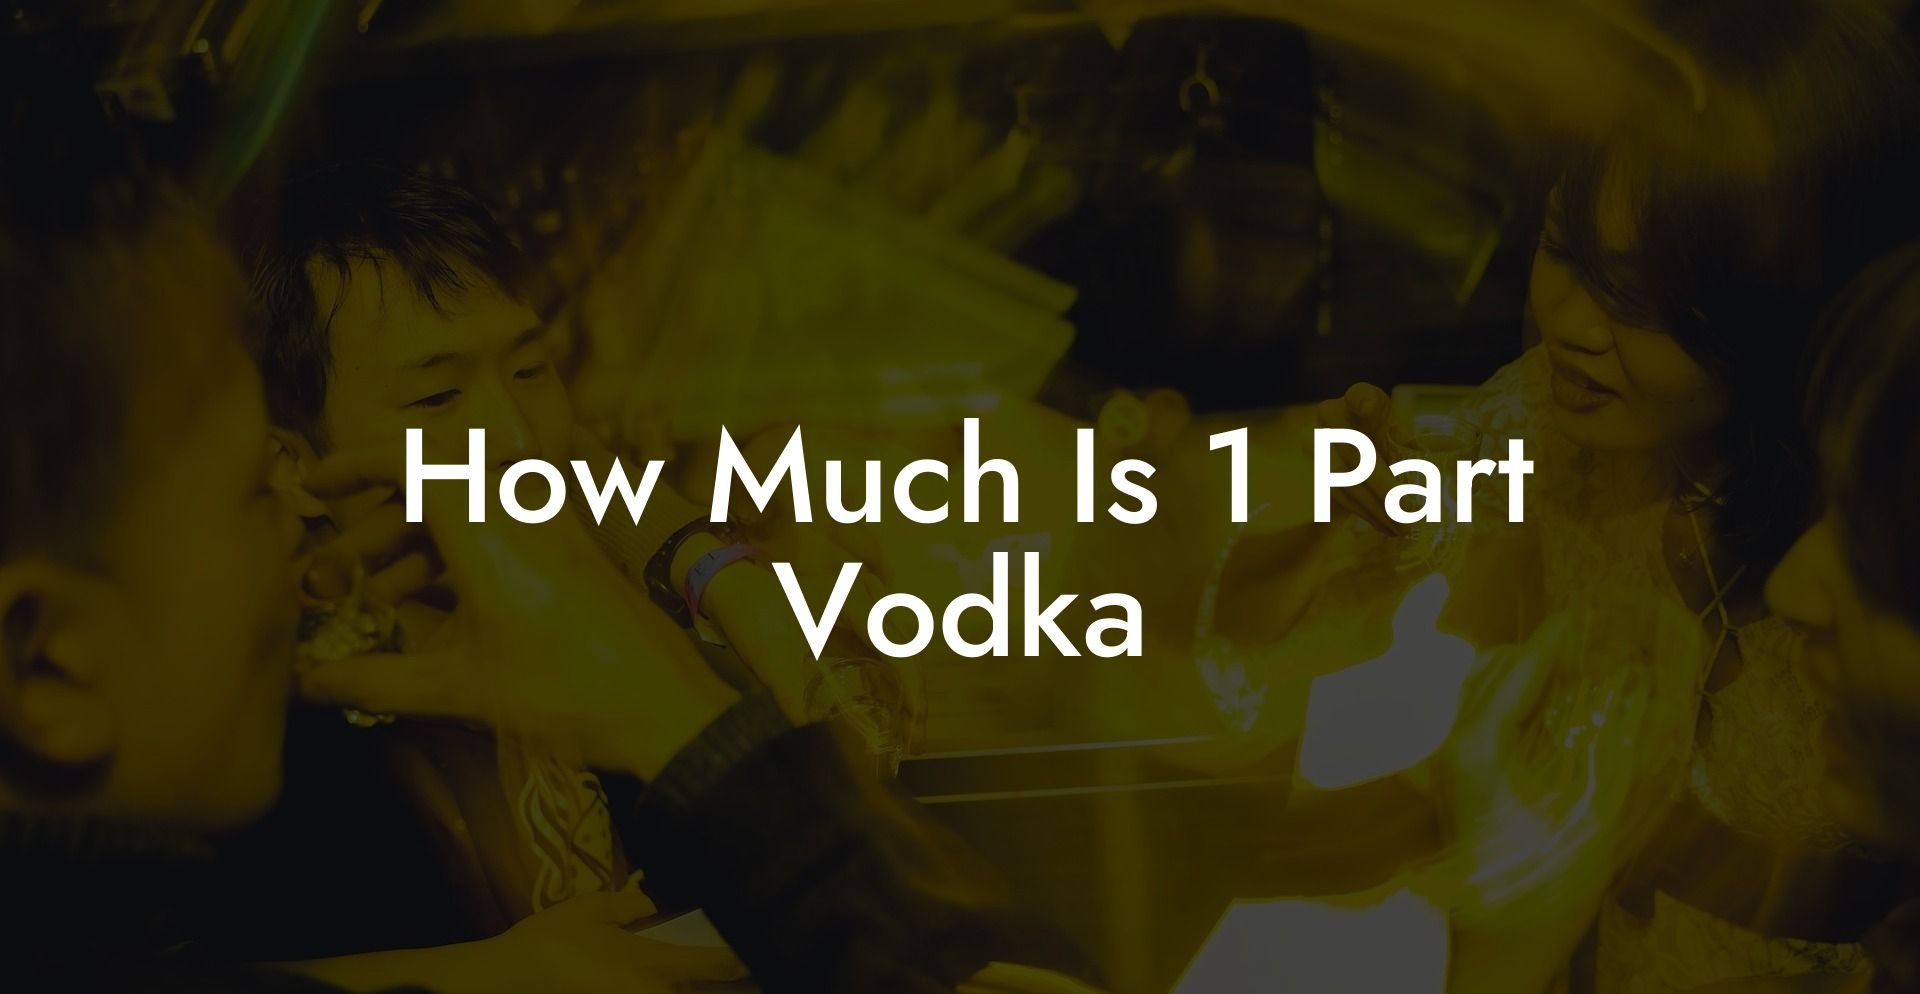 How Much Is 1 Part Vodka